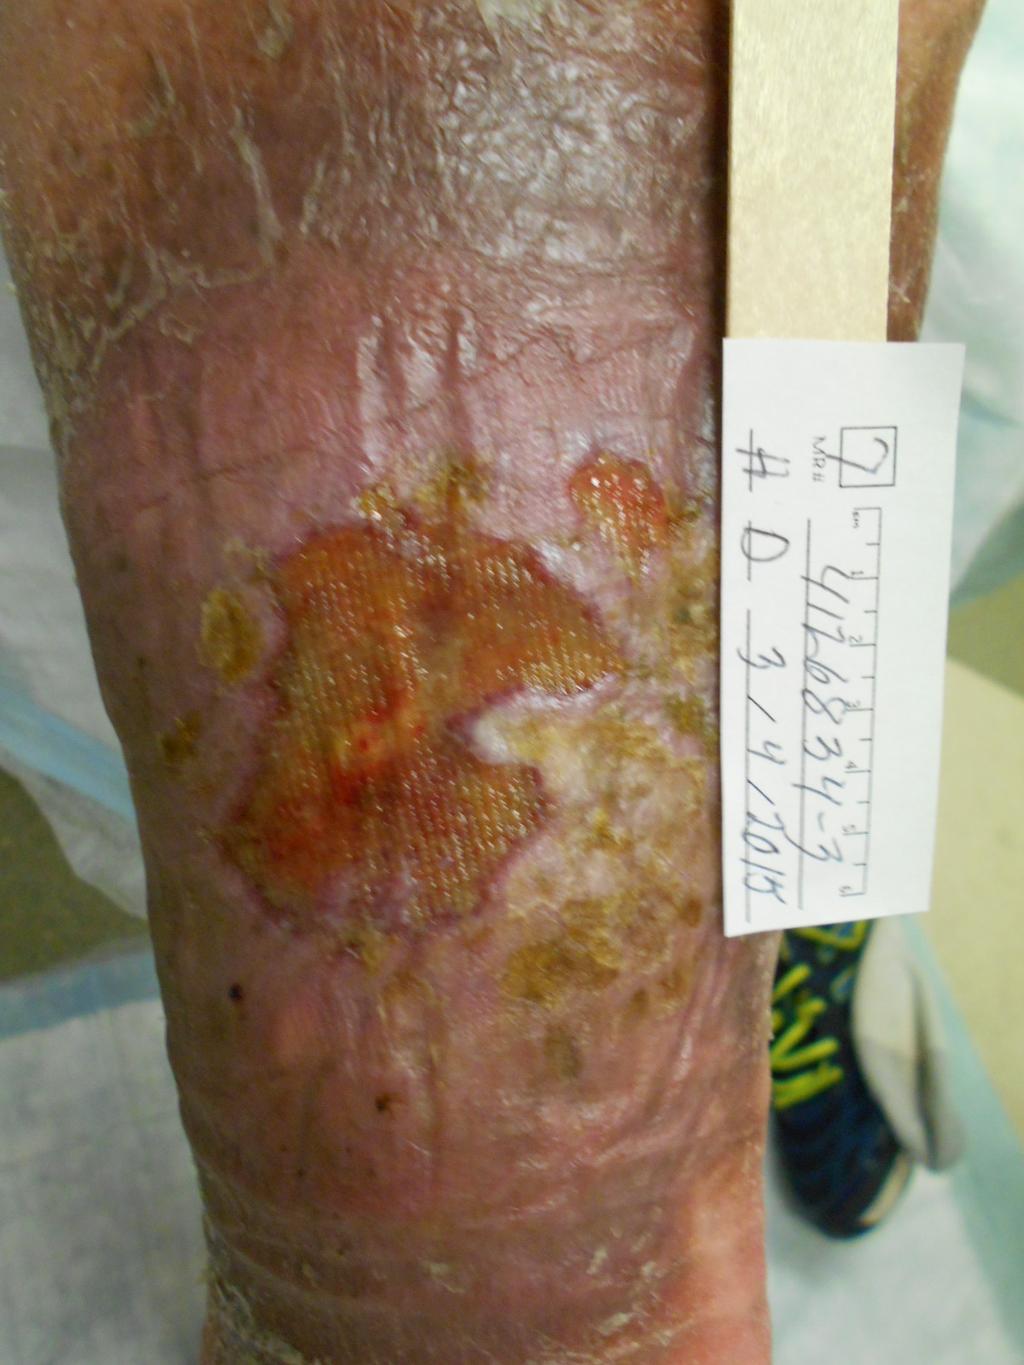 Chronic nonhealing leg ulcer 52 YO male w h/o multiple DVTs starting 11 yrs before initial visit in